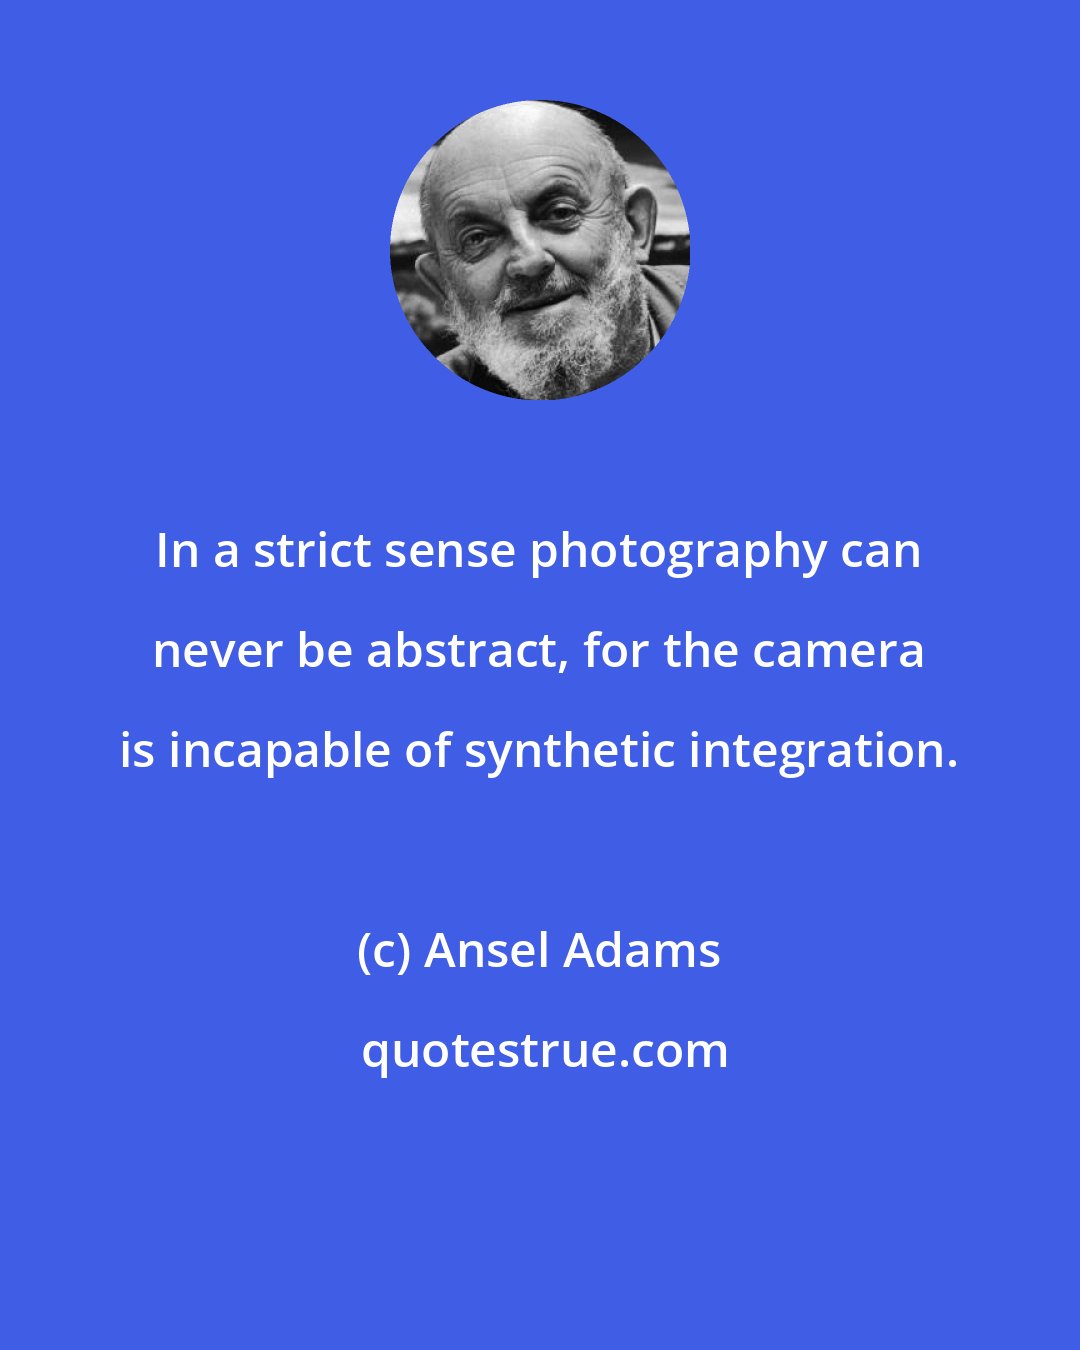 Ansel Adams: In a strict sense photography can never be abstract, for the camera is incapable of synthetic integration.